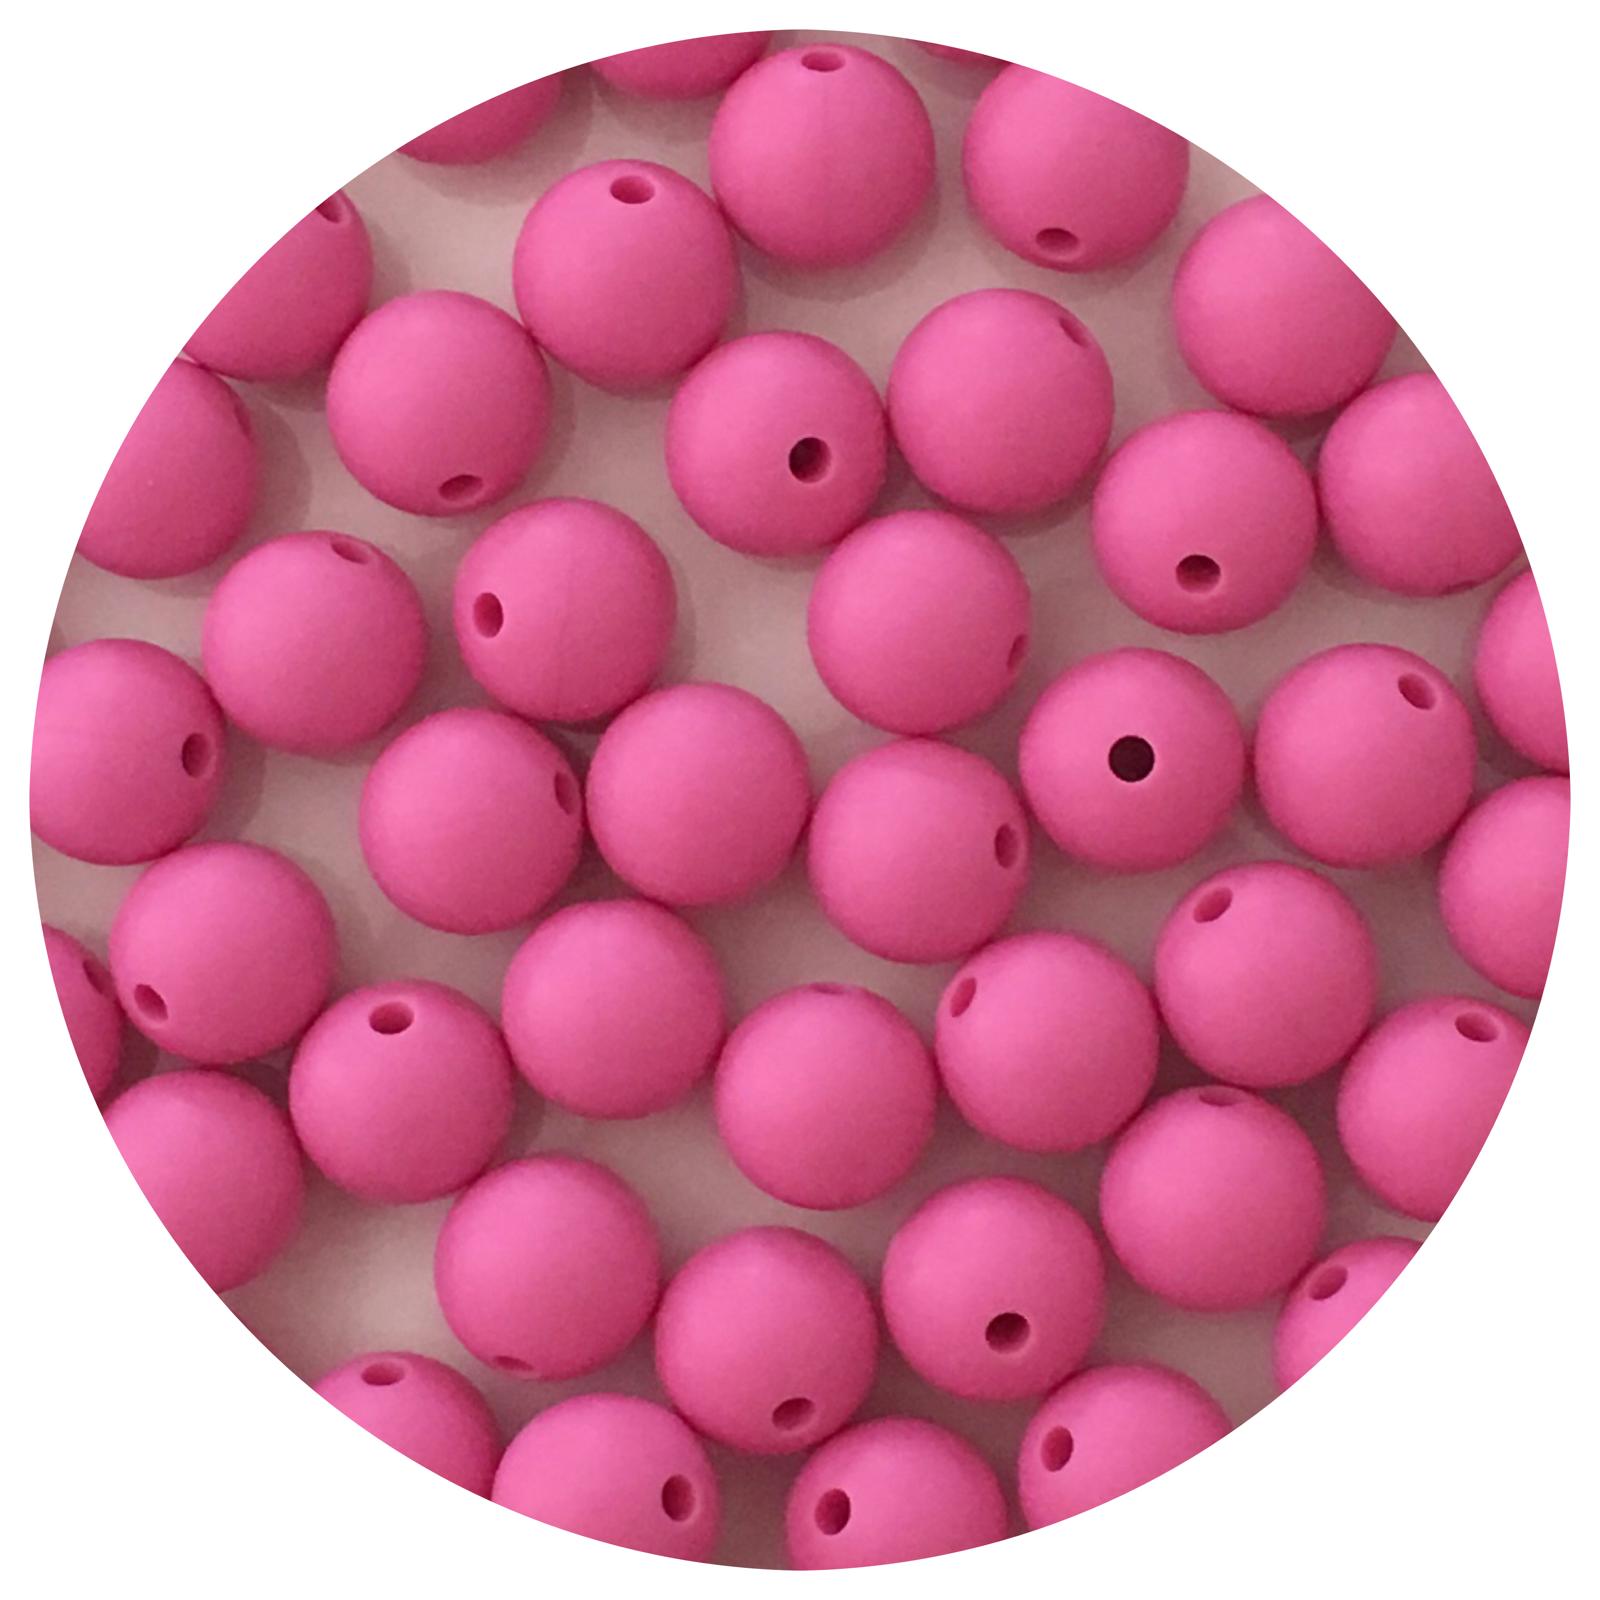 Orchid Pink - 12mm Round Silicone Beads - 10 beads